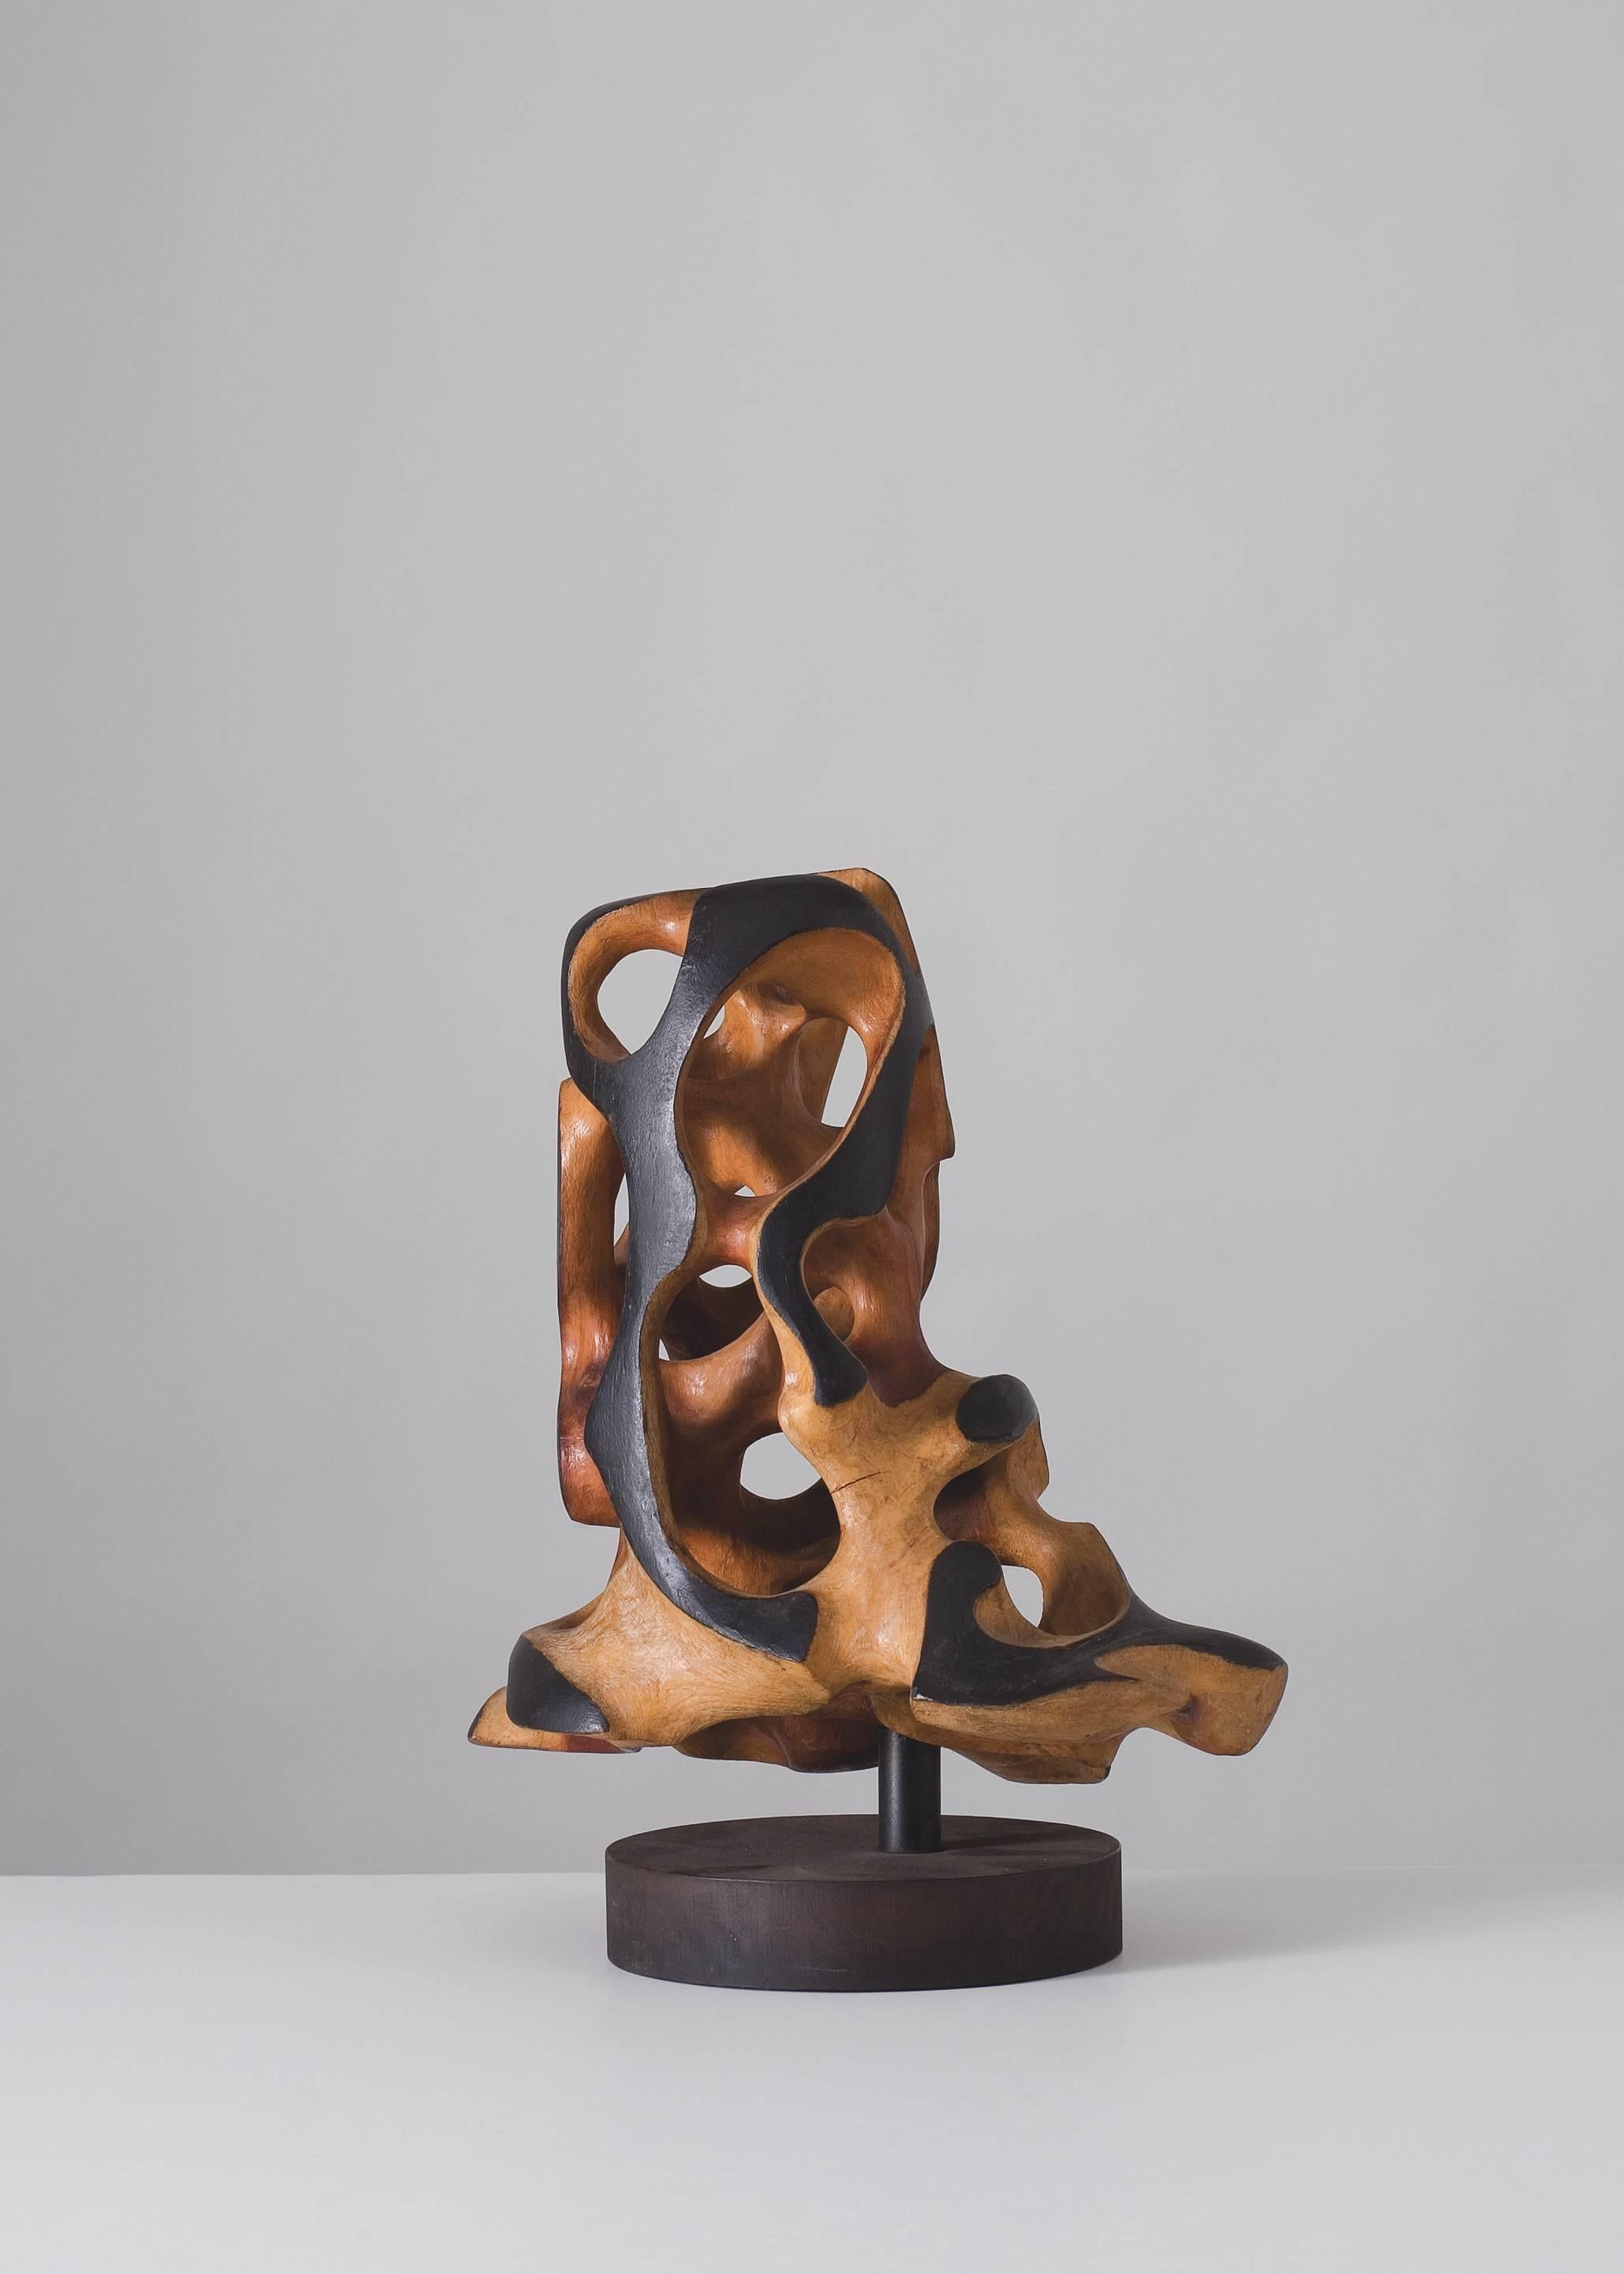 Typical of the sculptural output of Dal Fabbro, the lines of this piece shift rhythmically depending on the viewer's position. The artist plays with the relationship between space and form, highlighting the way the piece's profile can change before